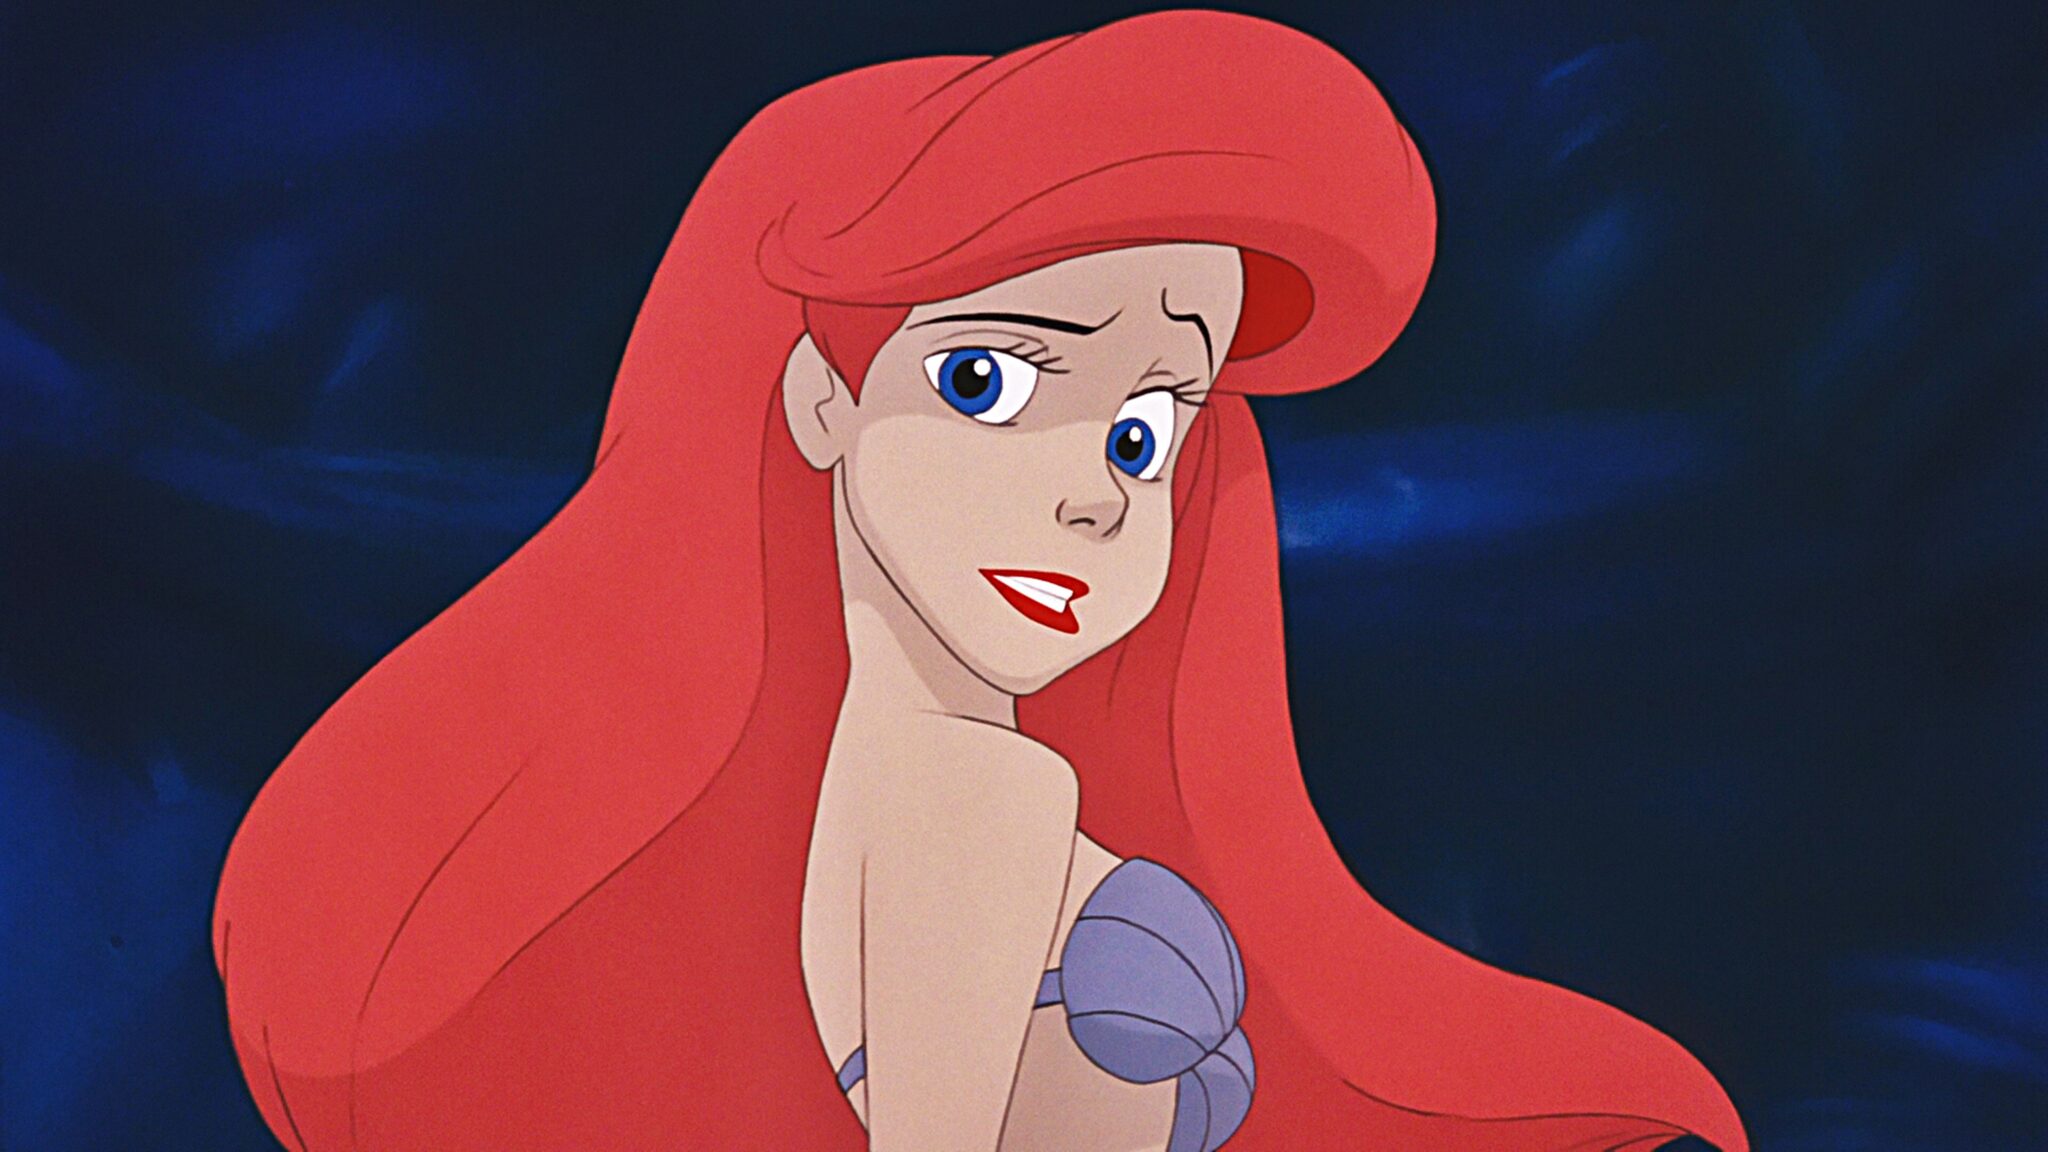 5 Deleted Disney Scenes That Would Have Changed Our Favorite Disney Movies